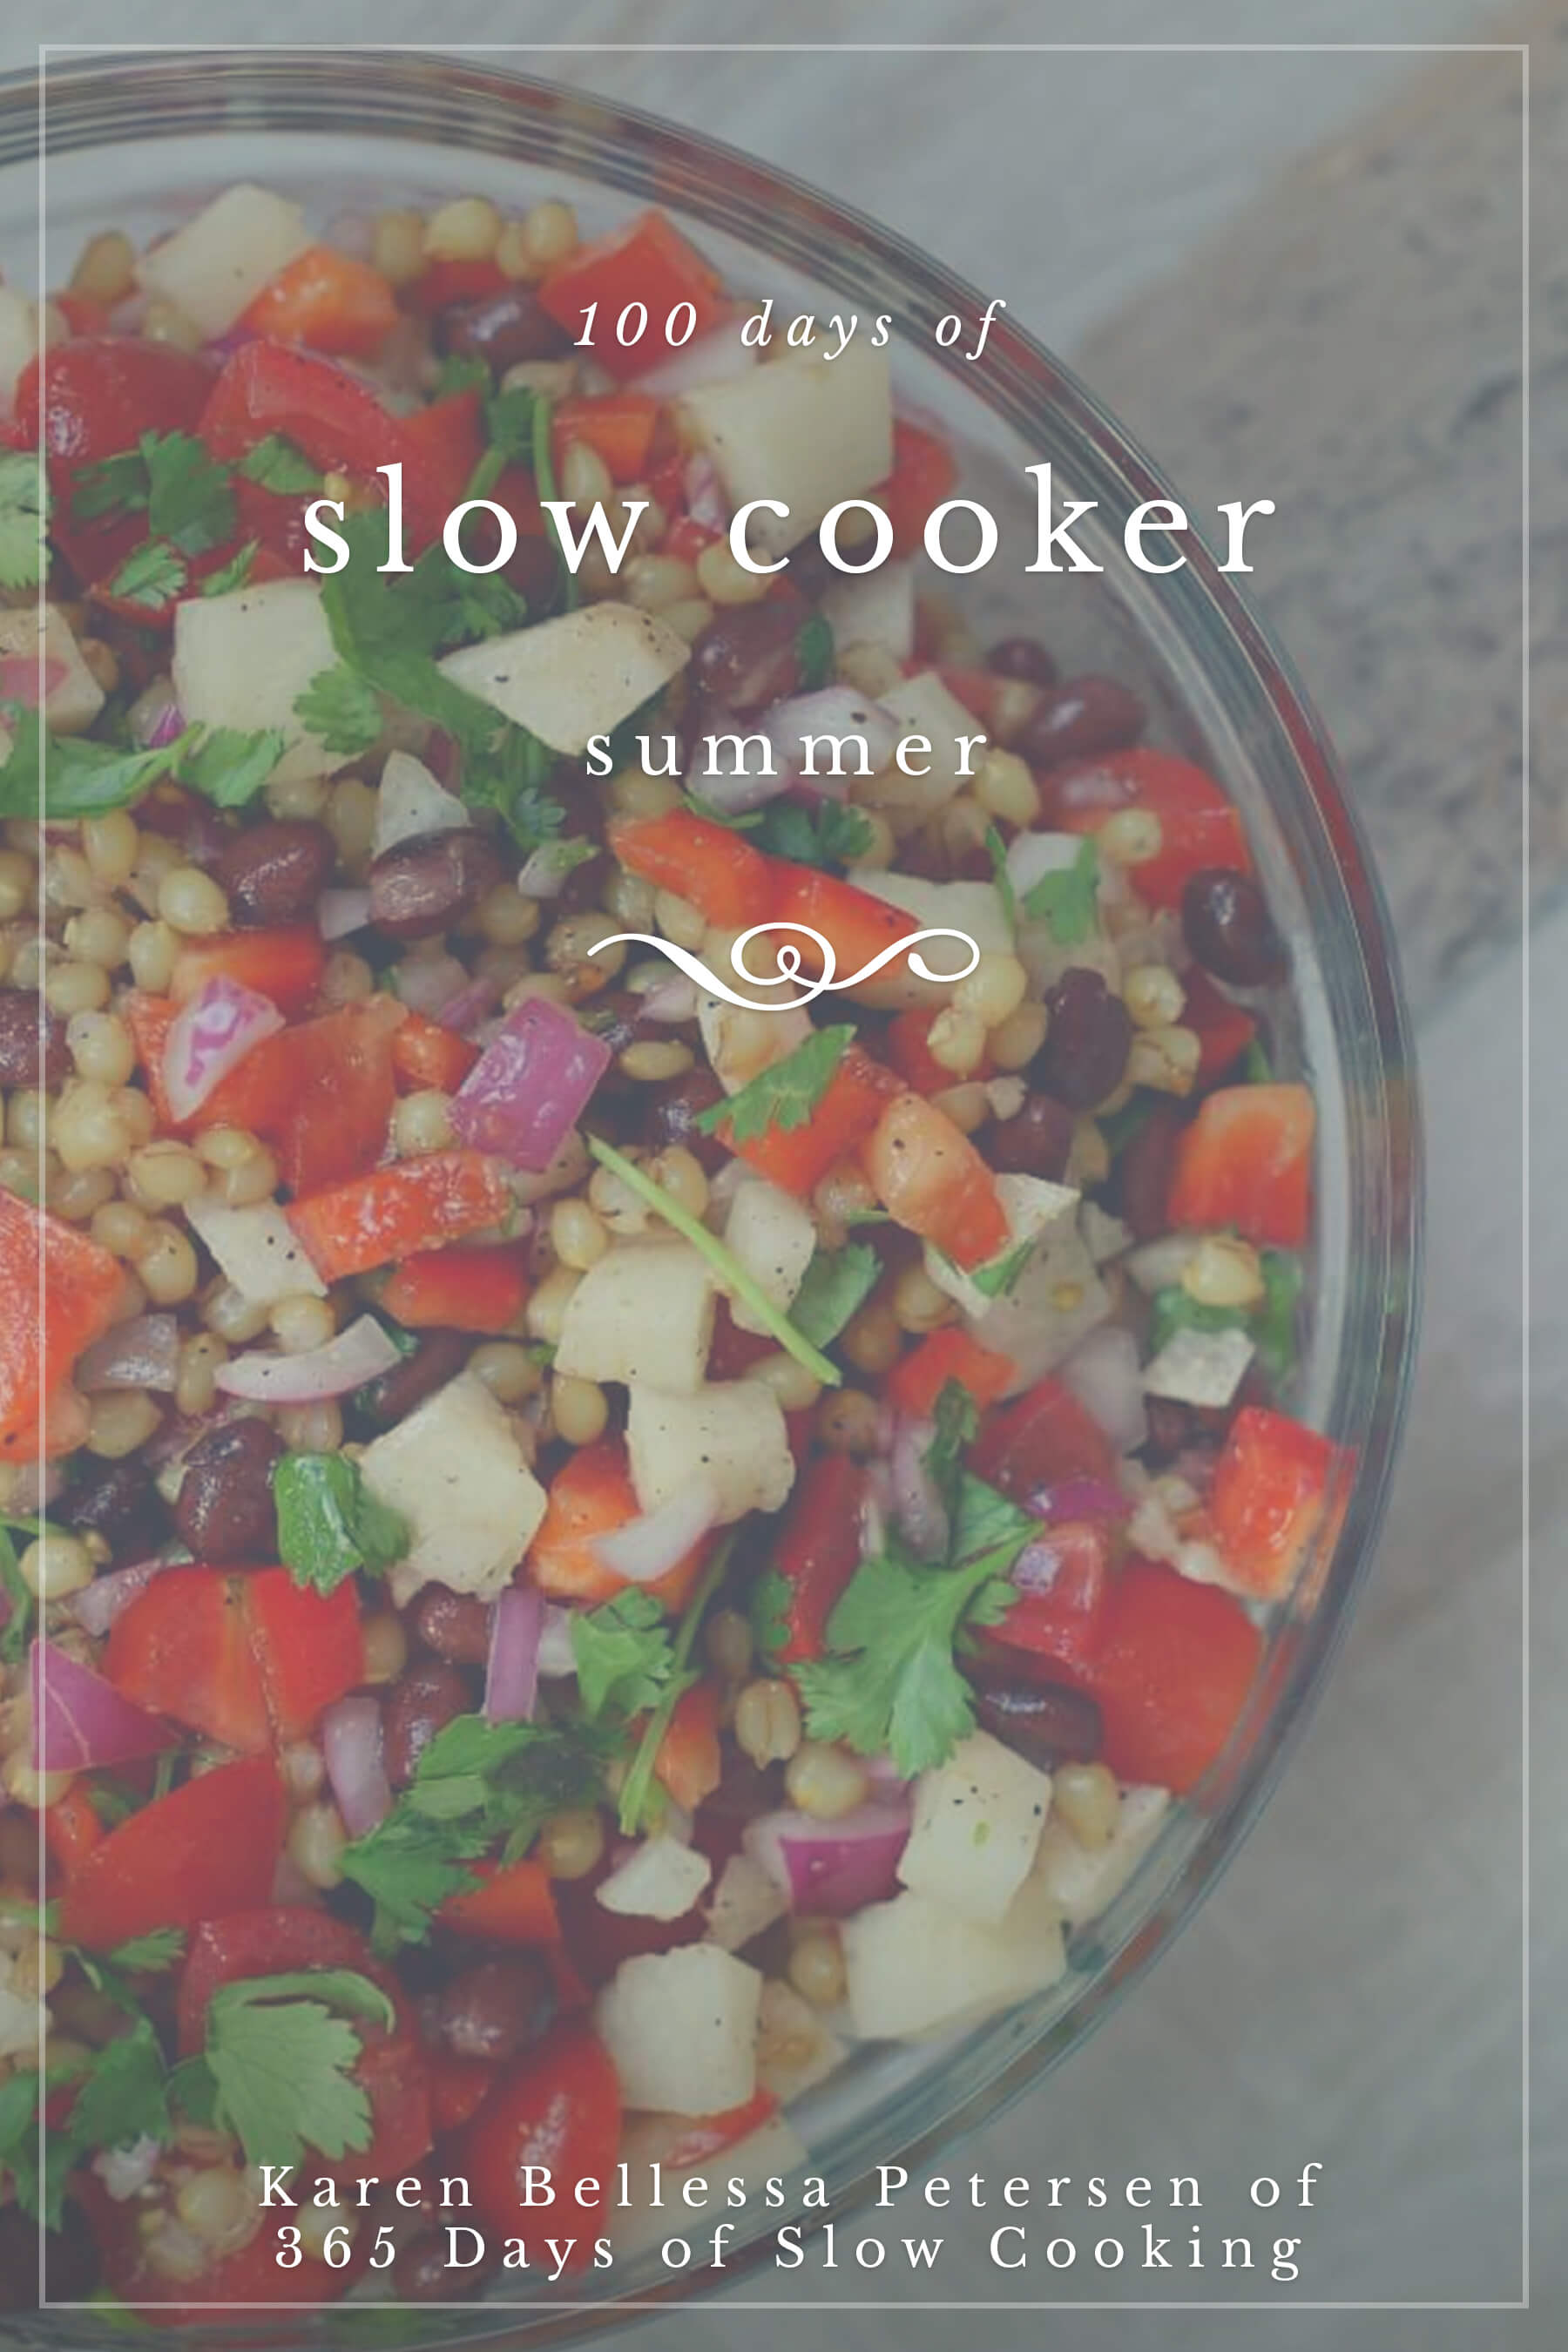 slow cooker summer recipes that are easy and delicious